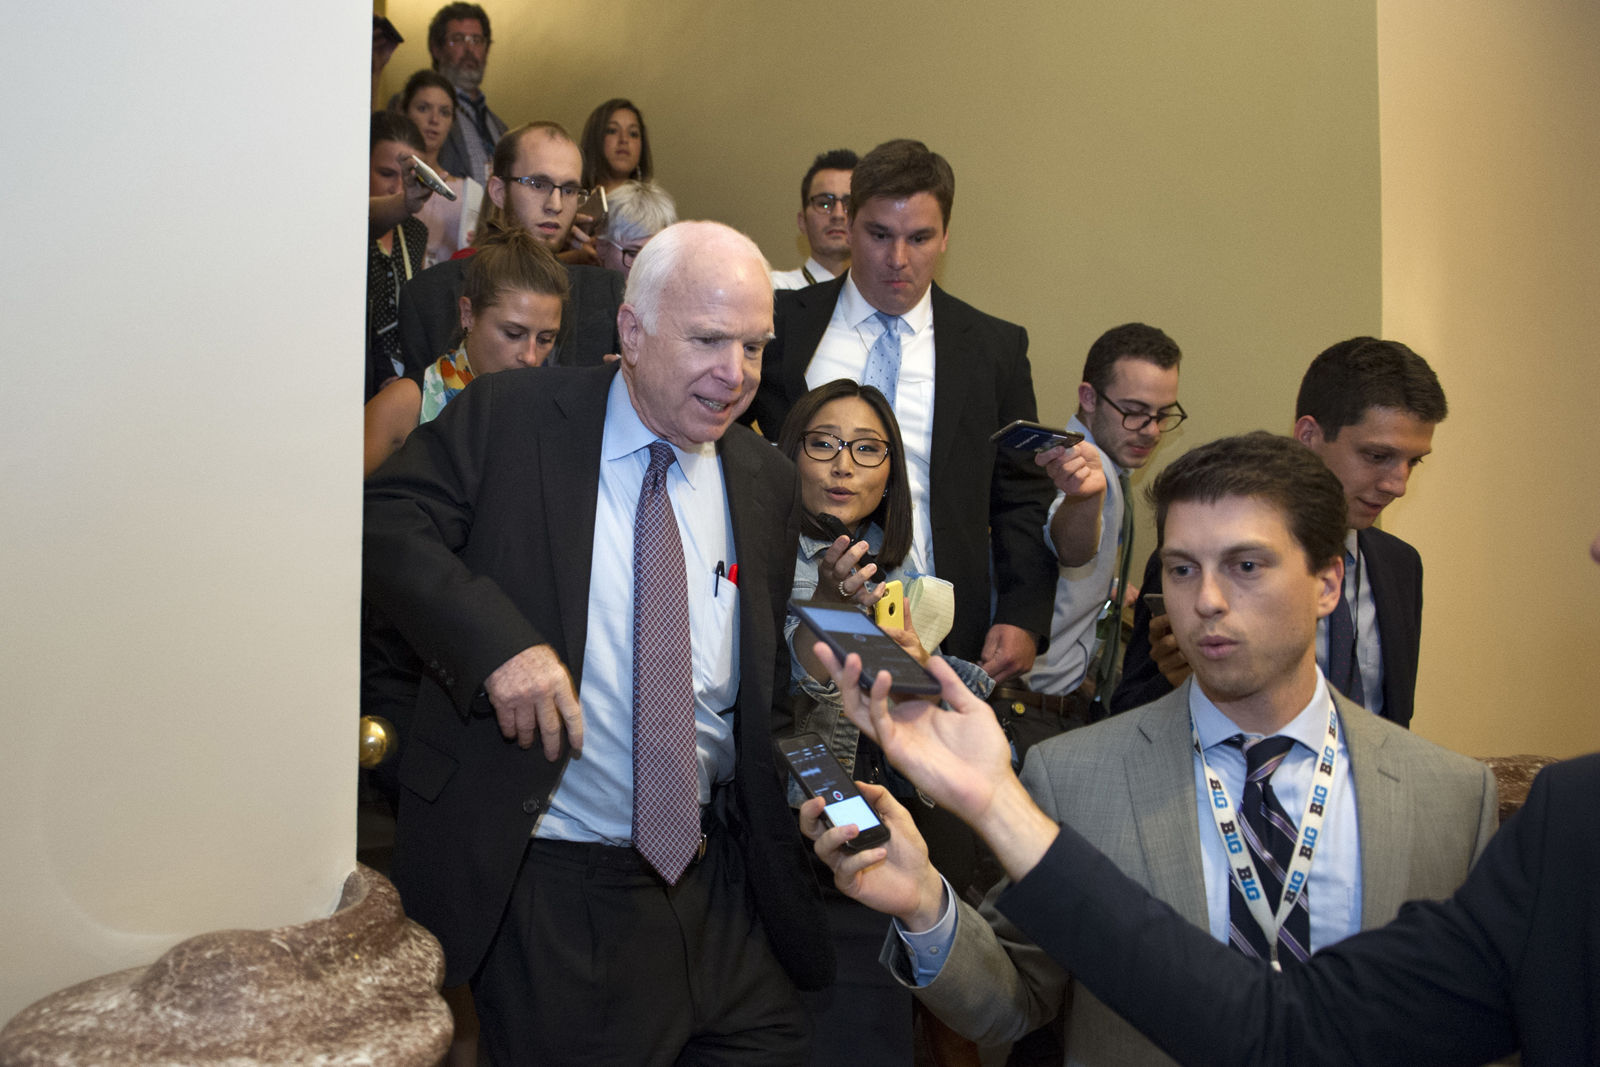 FILE - In this July 28, 2017, file photo, Sen. John McCain, R-Az., front left, is is followed by reporters after casting a 'no' vote on a a measure to repeal parts of former President Barack Obama's health care law, on Capitol Hill in Washington. Longtime friends and advisers of Sen. John McCain said they were not surprised by his decision in September to oppose a last-ditch Republican effort to overhaul the national health care law. McCain objected to the legislation in part because Senate GOP leaders wanted a vote without holding hearings or debate. (AP Photo/Cliff Owen, File)